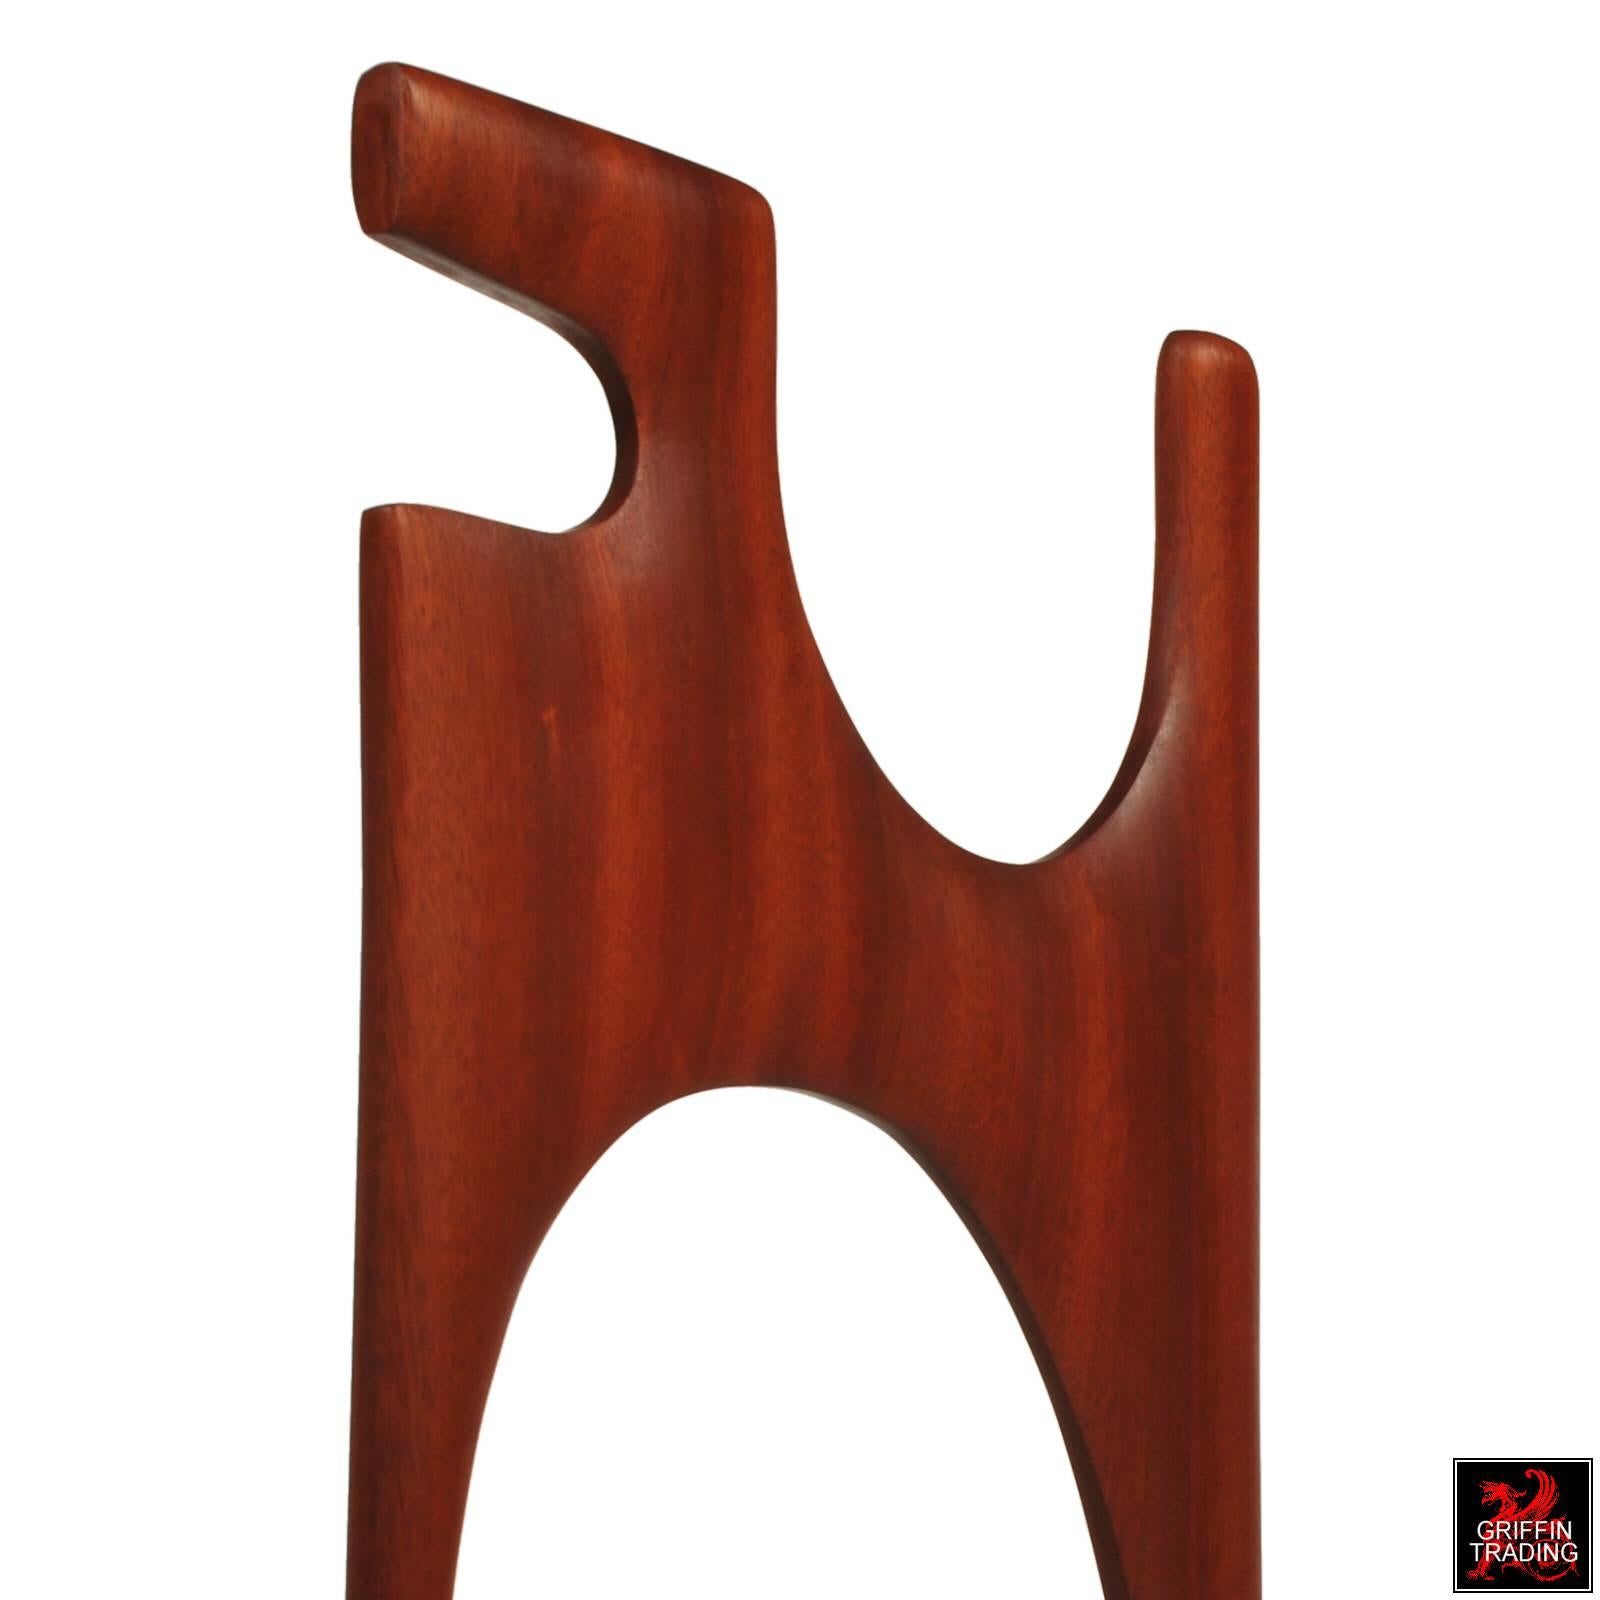 DRH16 Modern Dog Wood Sculpture, Mid-Century Modern Style In Excellent Condition For Sale In Dallas, TX